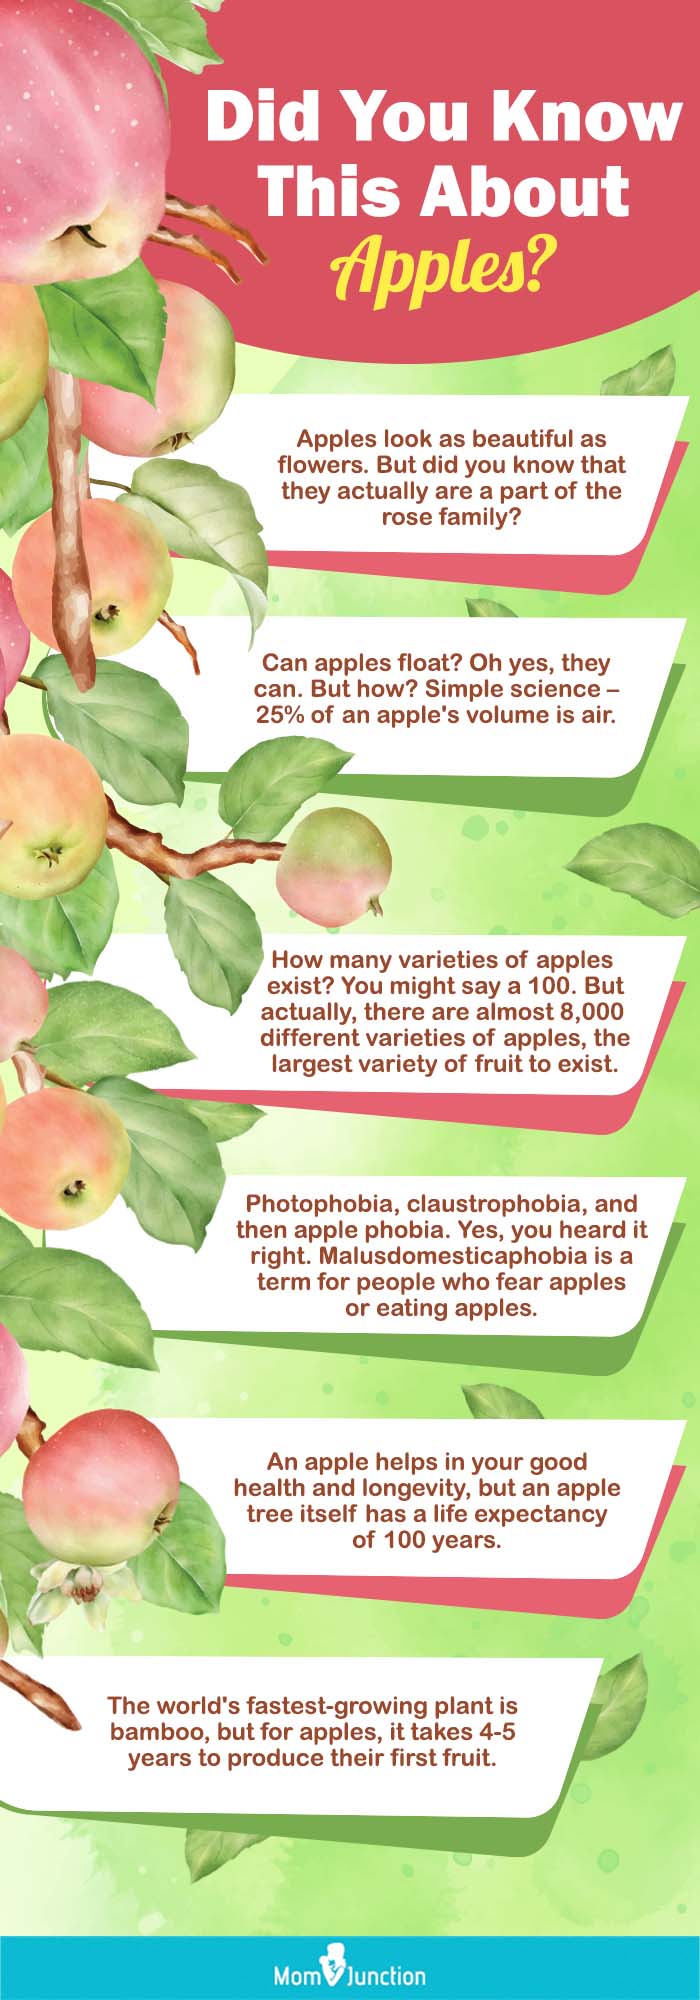 Apple Home Remedies - 8 Natural Benefits of Apples